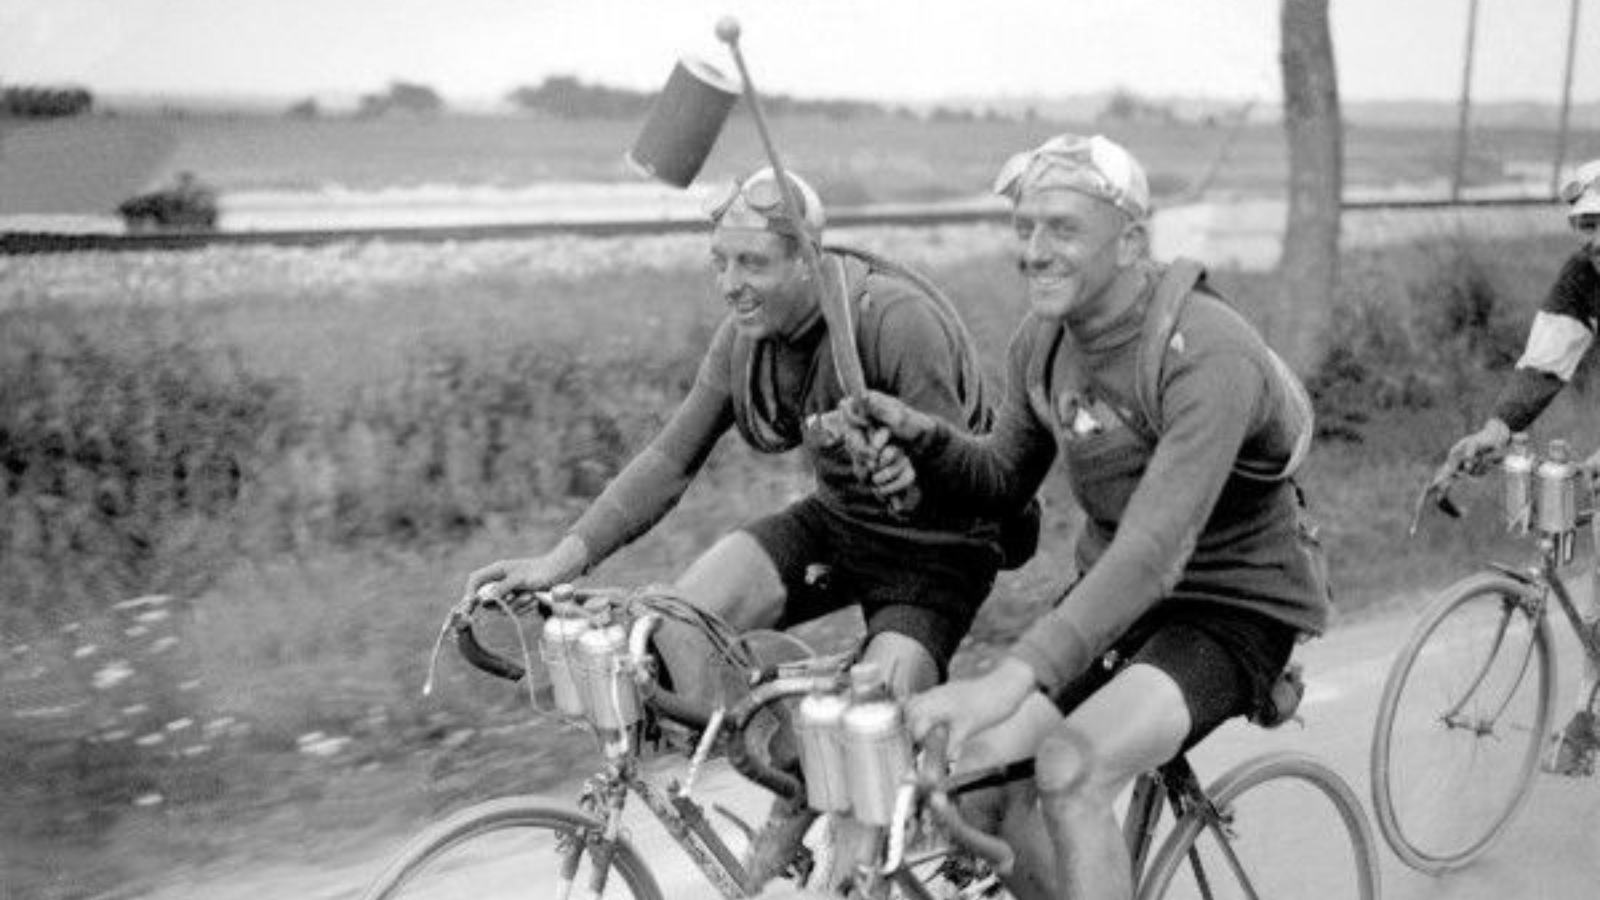 Vintage cycling image from the 1920s, two cyclists with the socalled laterne rouge, the prize for the last placed rider of the race